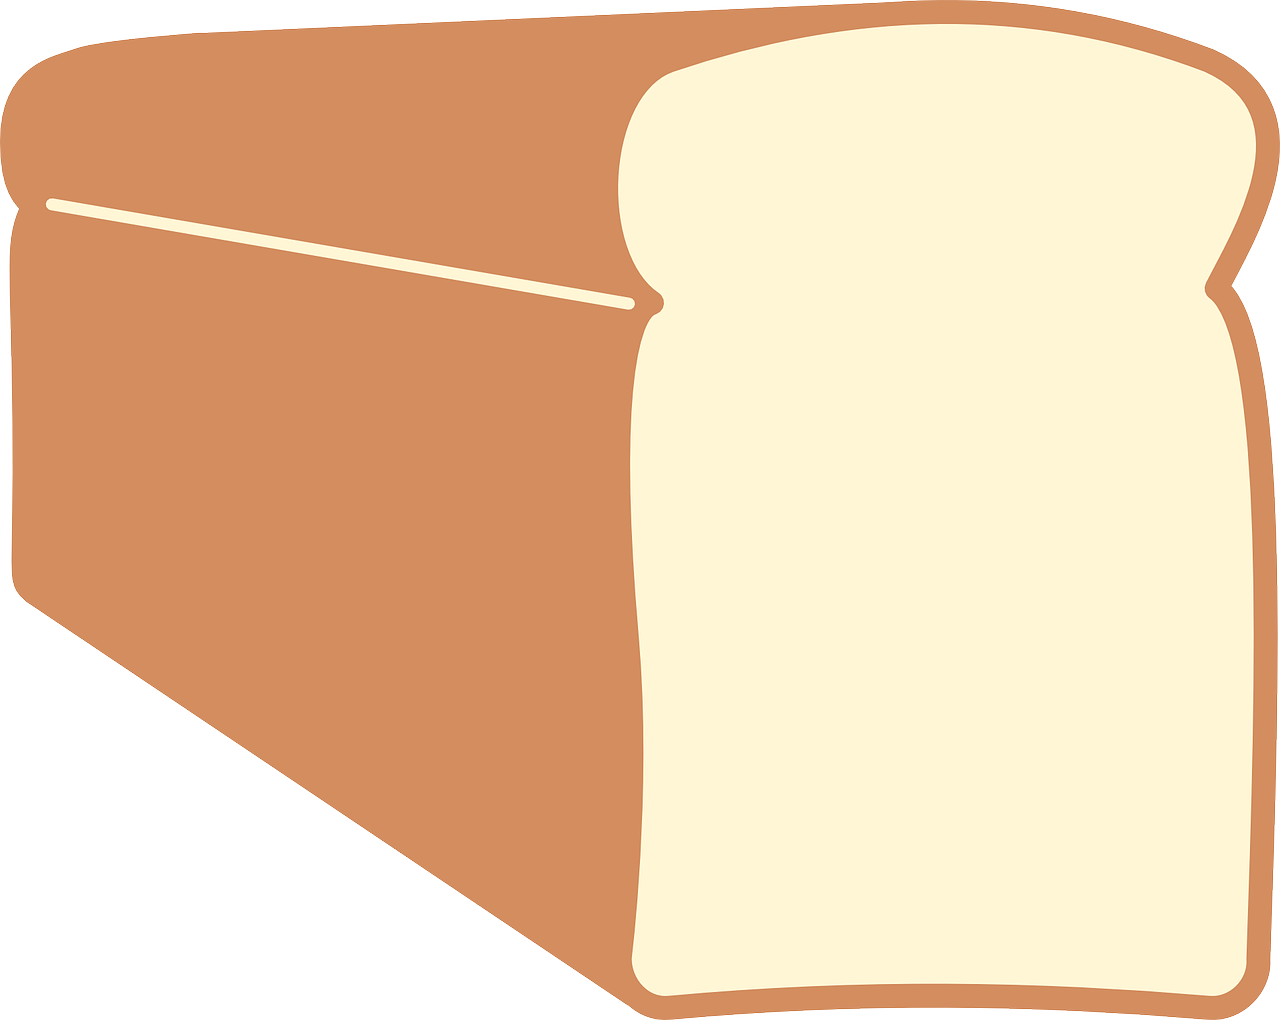 White Bread PNG Images HD